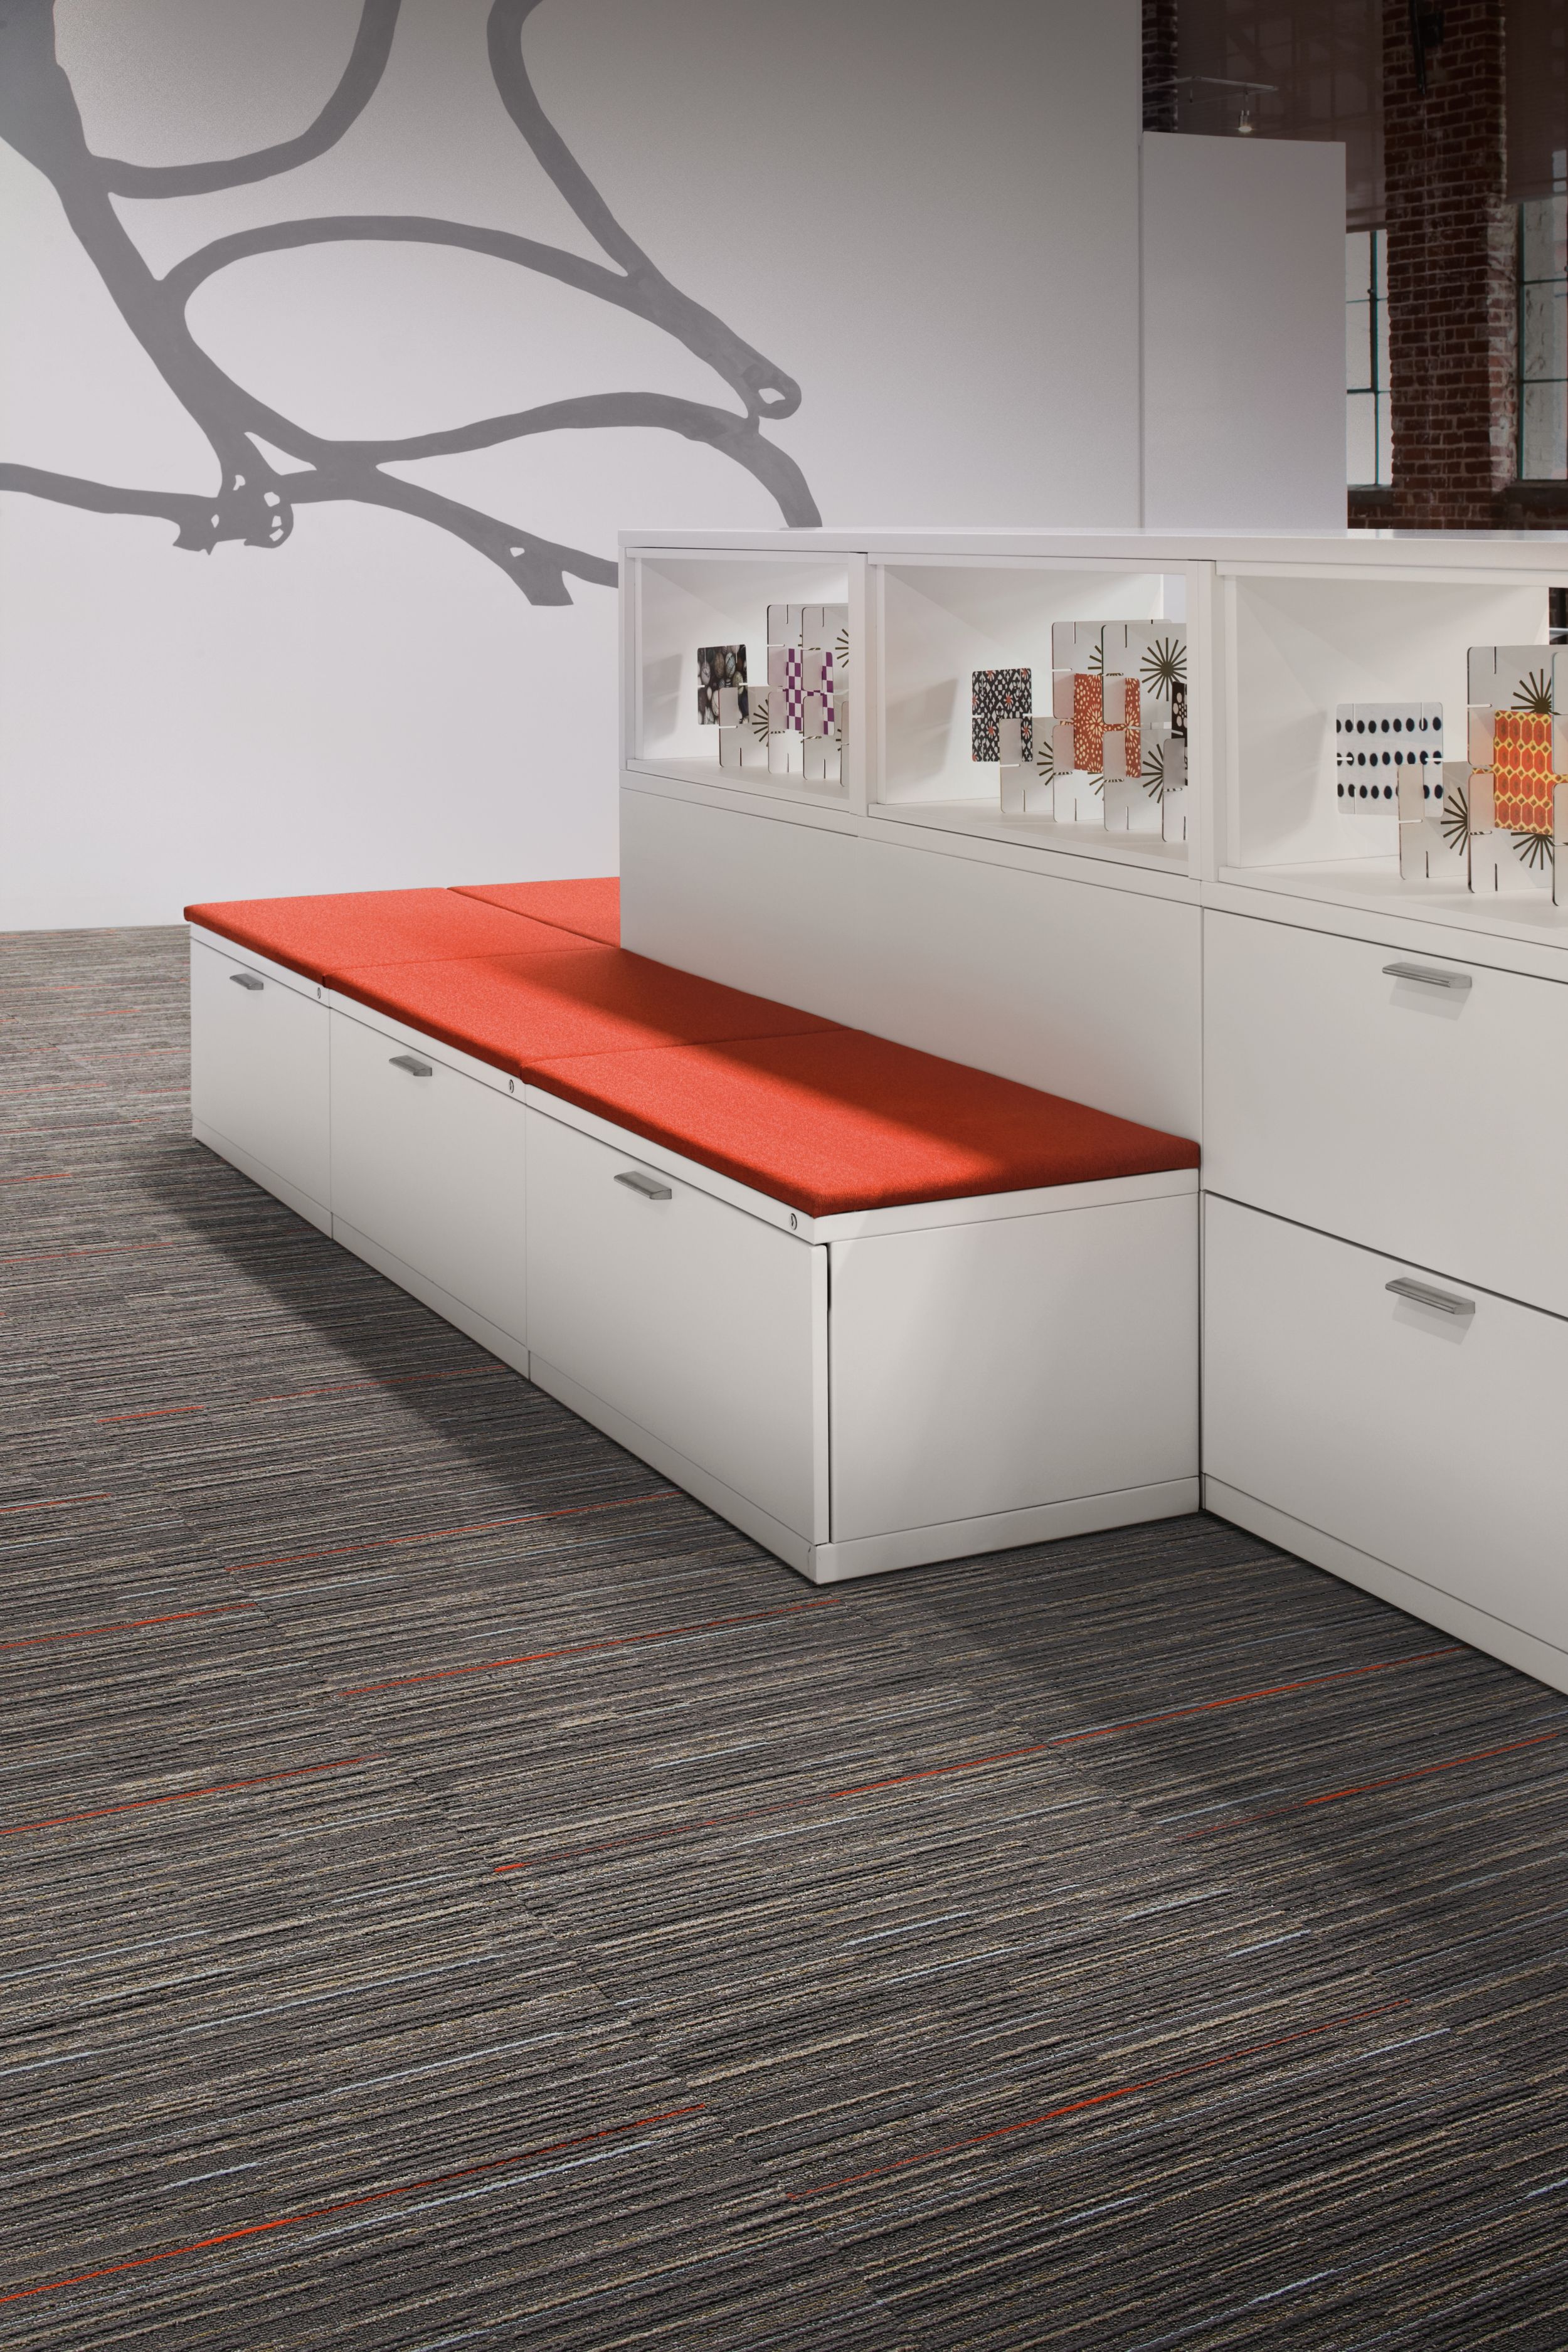 Interface Alliteration carpet tile in Mineral/Persimmon in office work area with filing cabinets imagen número 5